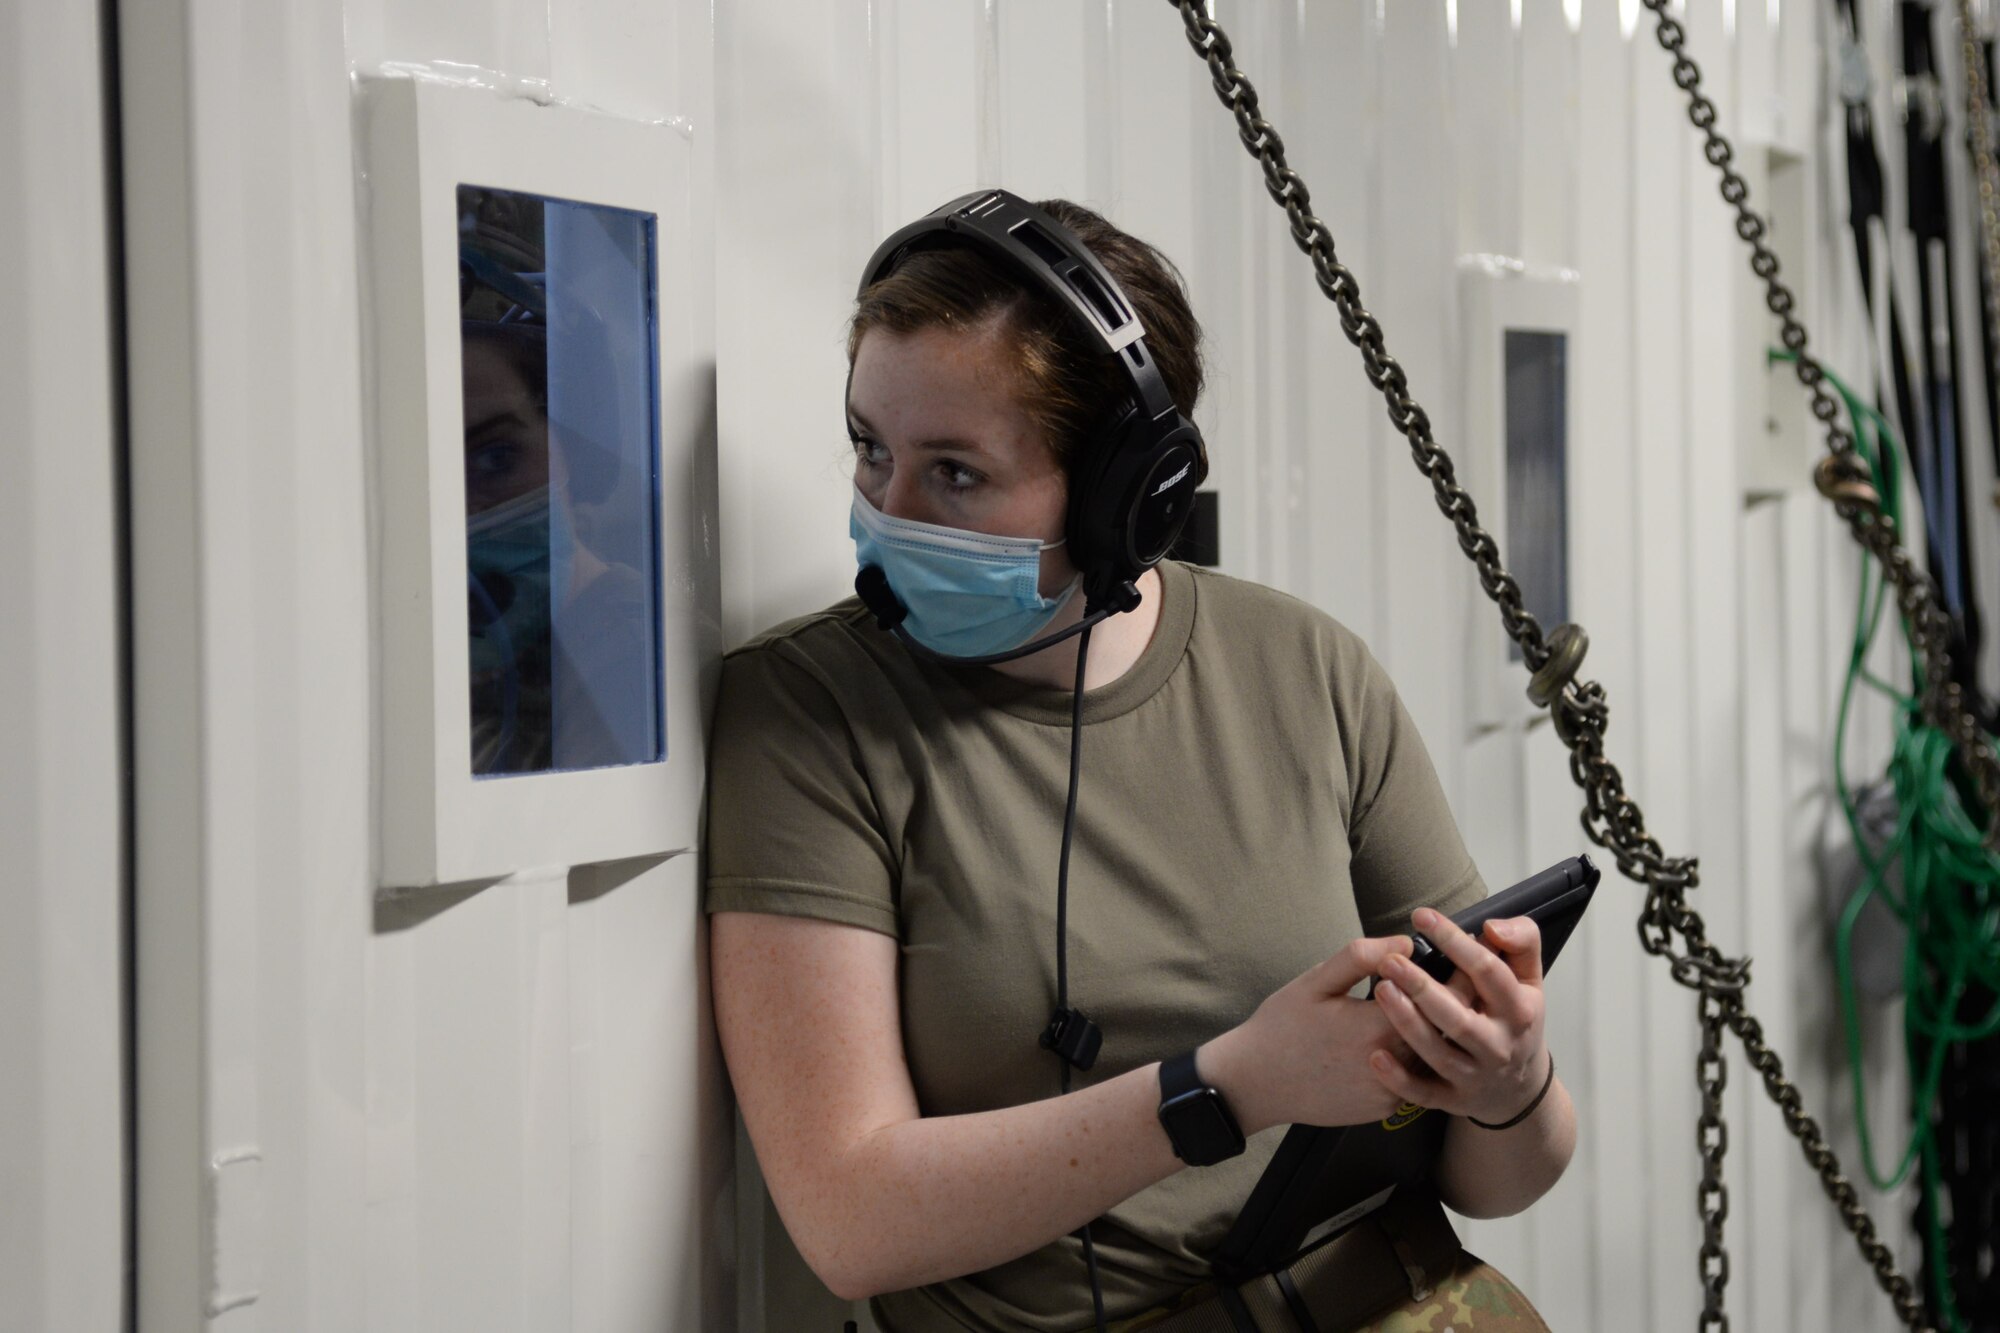 U.S. Air Force Airman 1st Class Fiona Kirnan, 10th Expeditionary Aeromedical Evacuation Flight medical technician, looks through a window of a Negatively Pressurized Conex during a training at Ramstein Air Base, Germany, Jan. 30, 2021